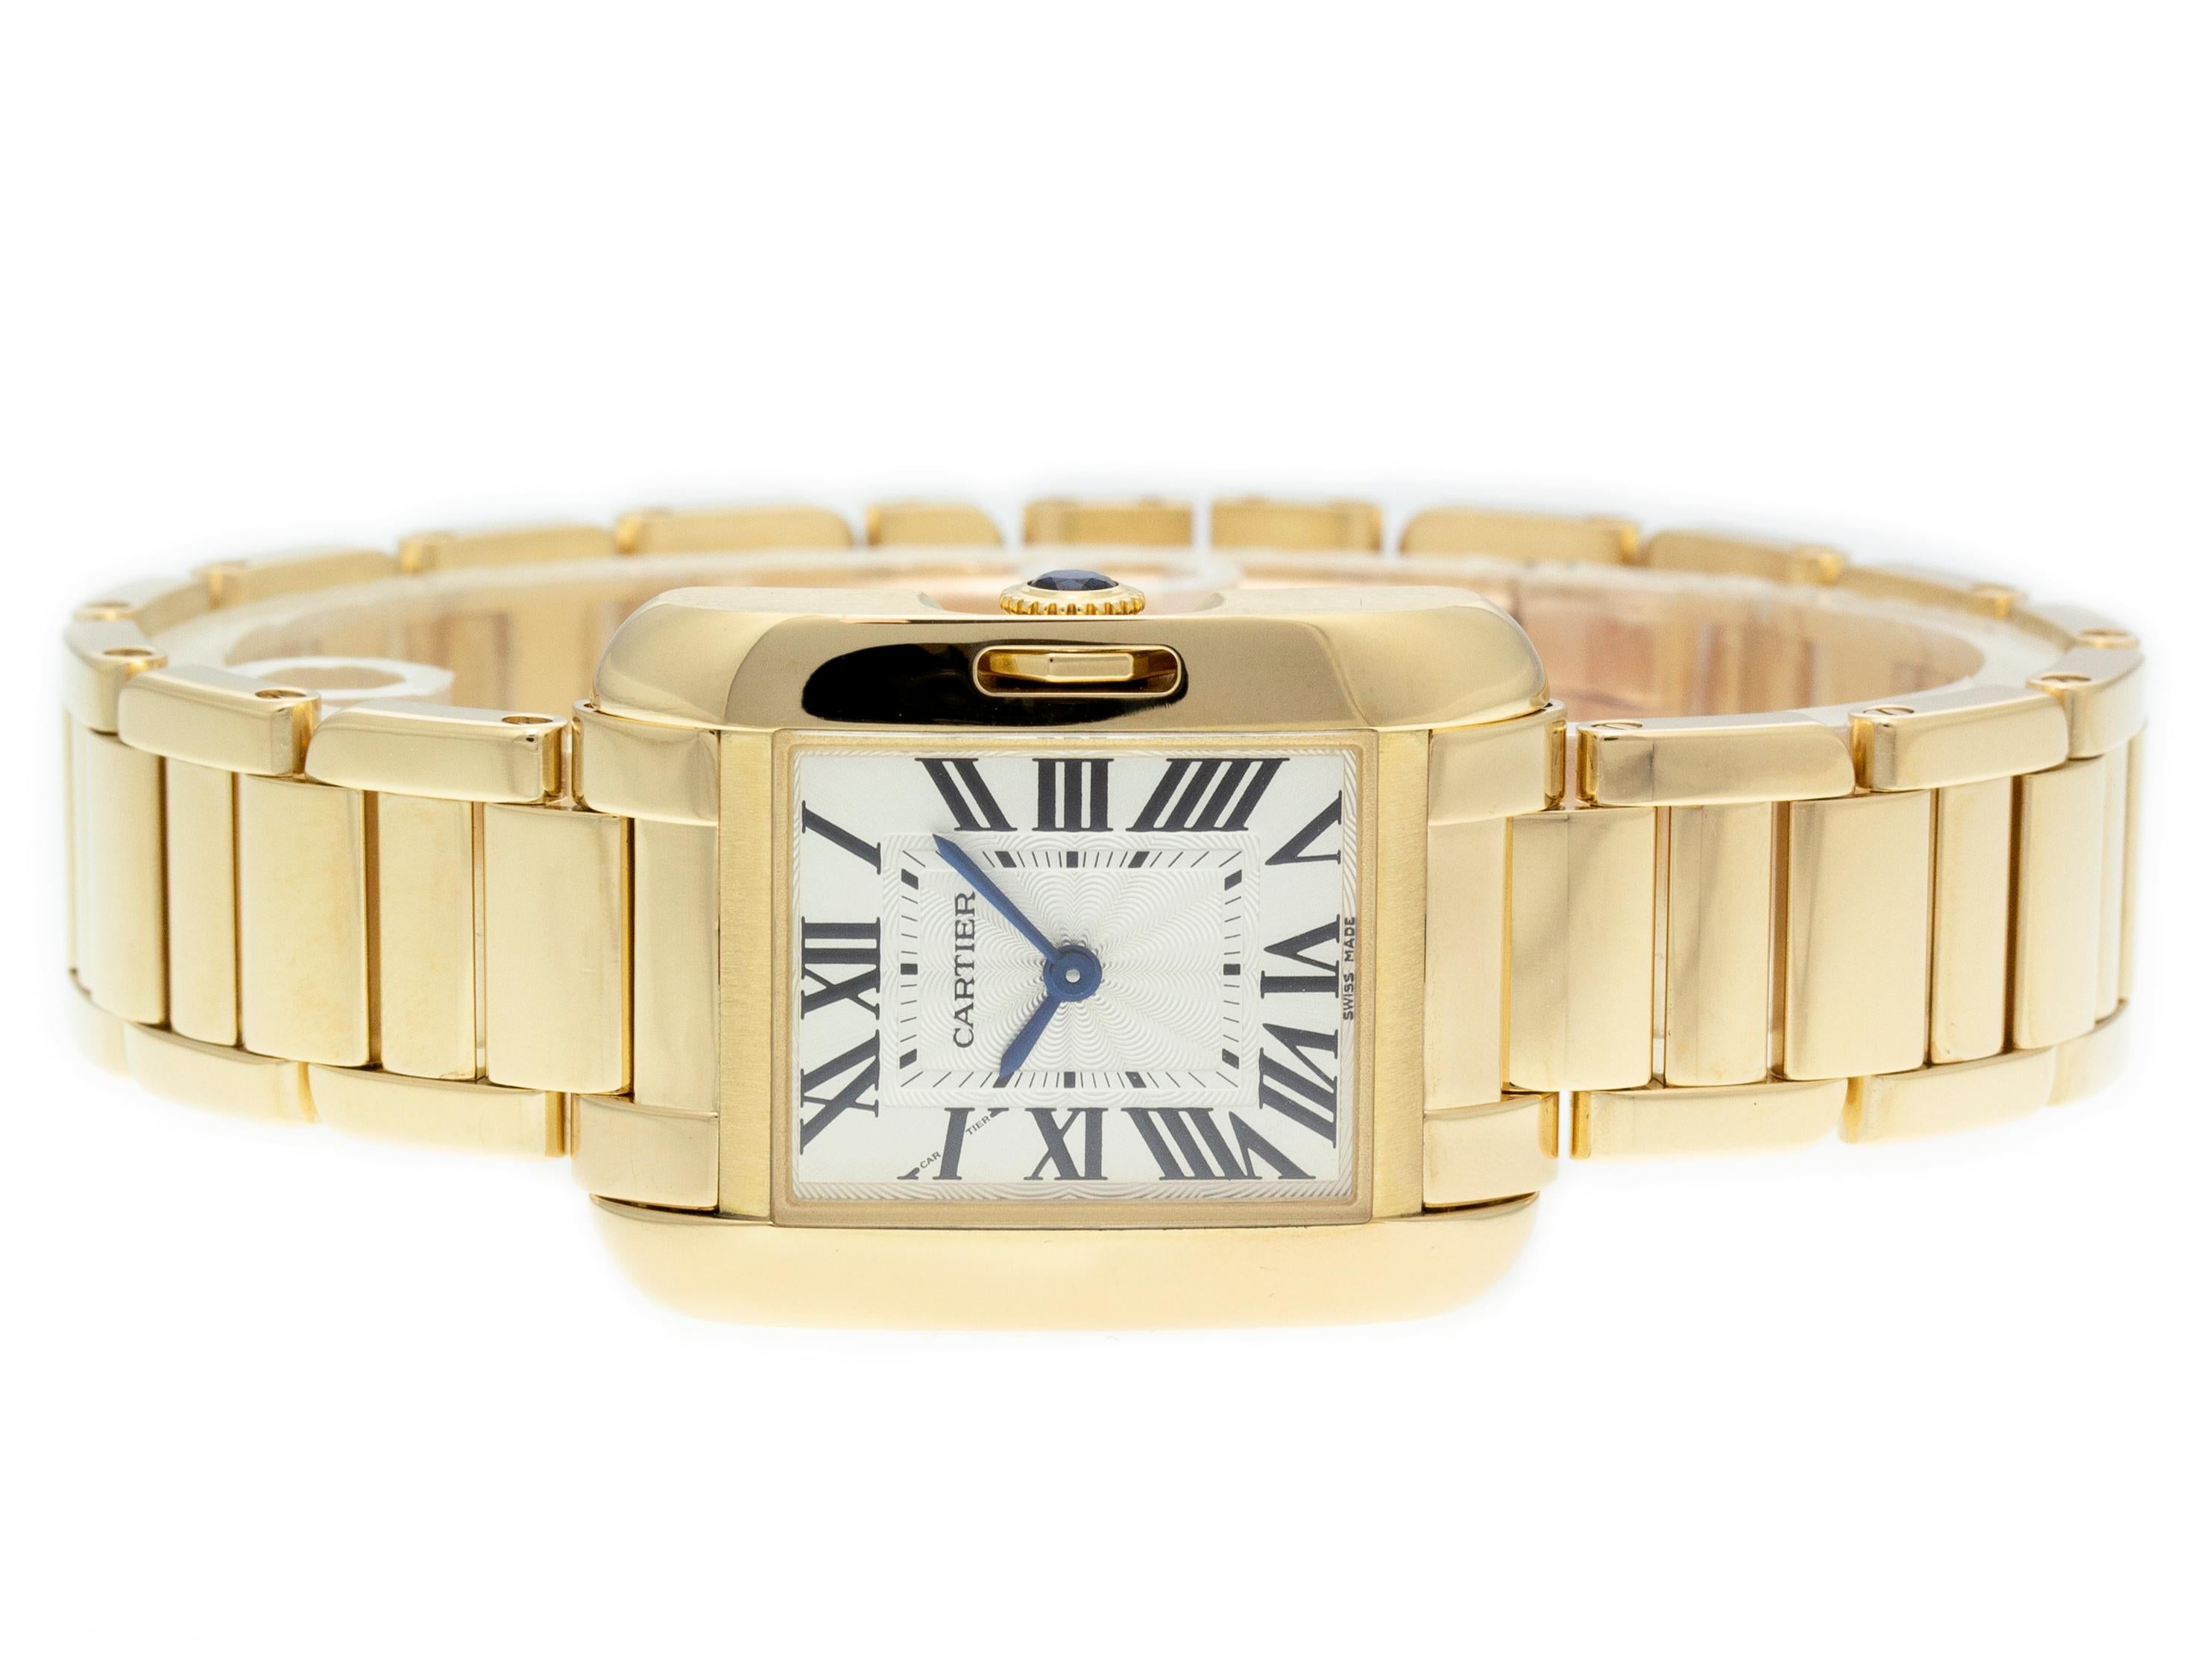 Cartier Tank Anglaise W5310014 In Excellent Condition For Sale In Willow Grove, PA